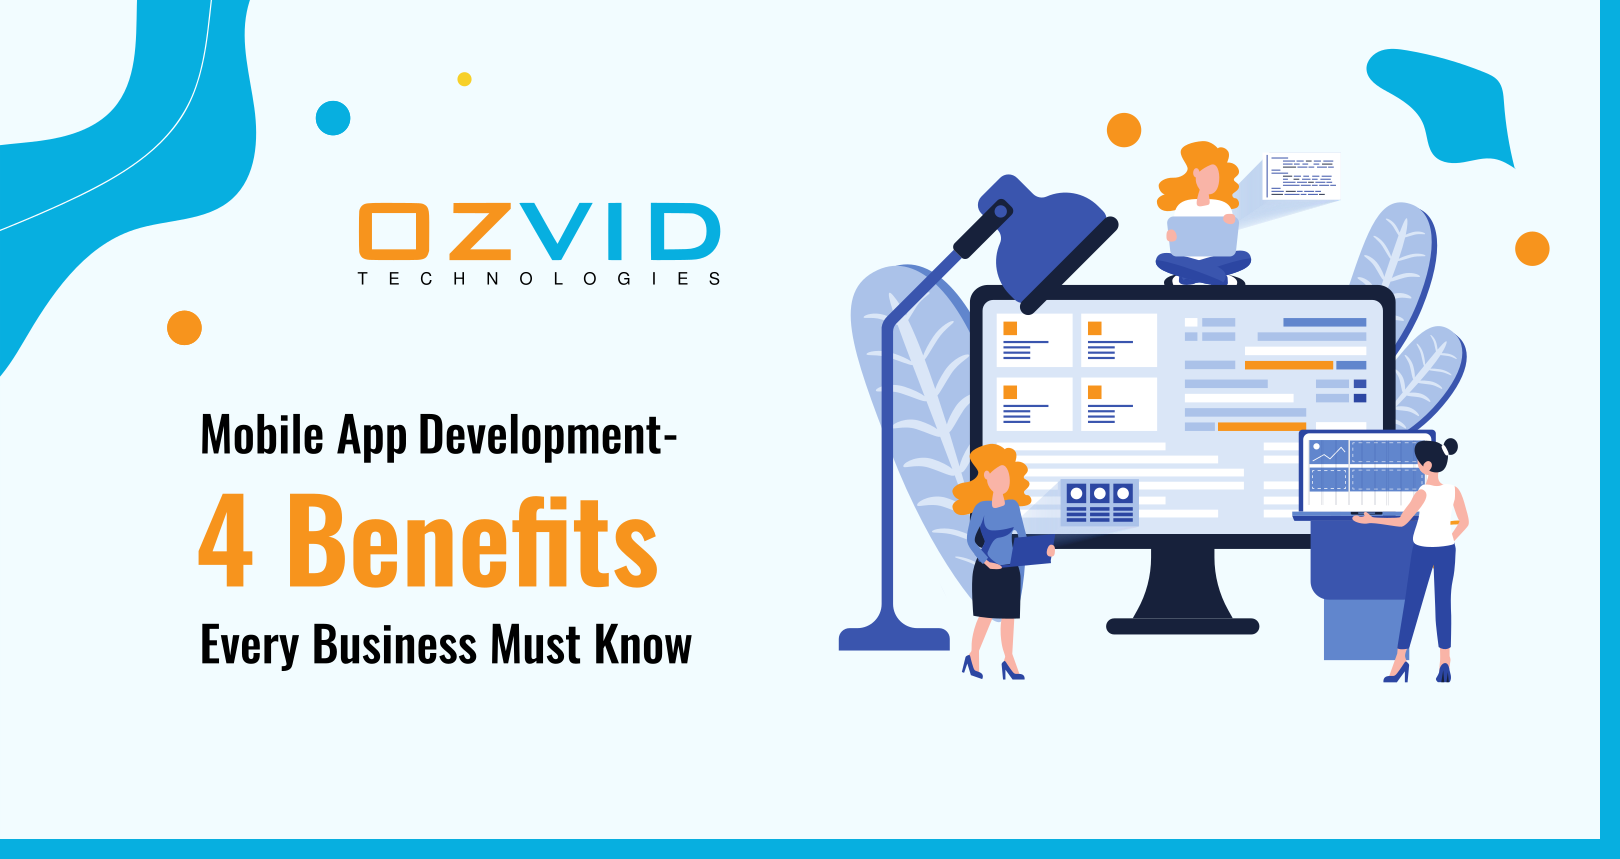 Mobile App Development - 4 Benefits Every Business Must Know